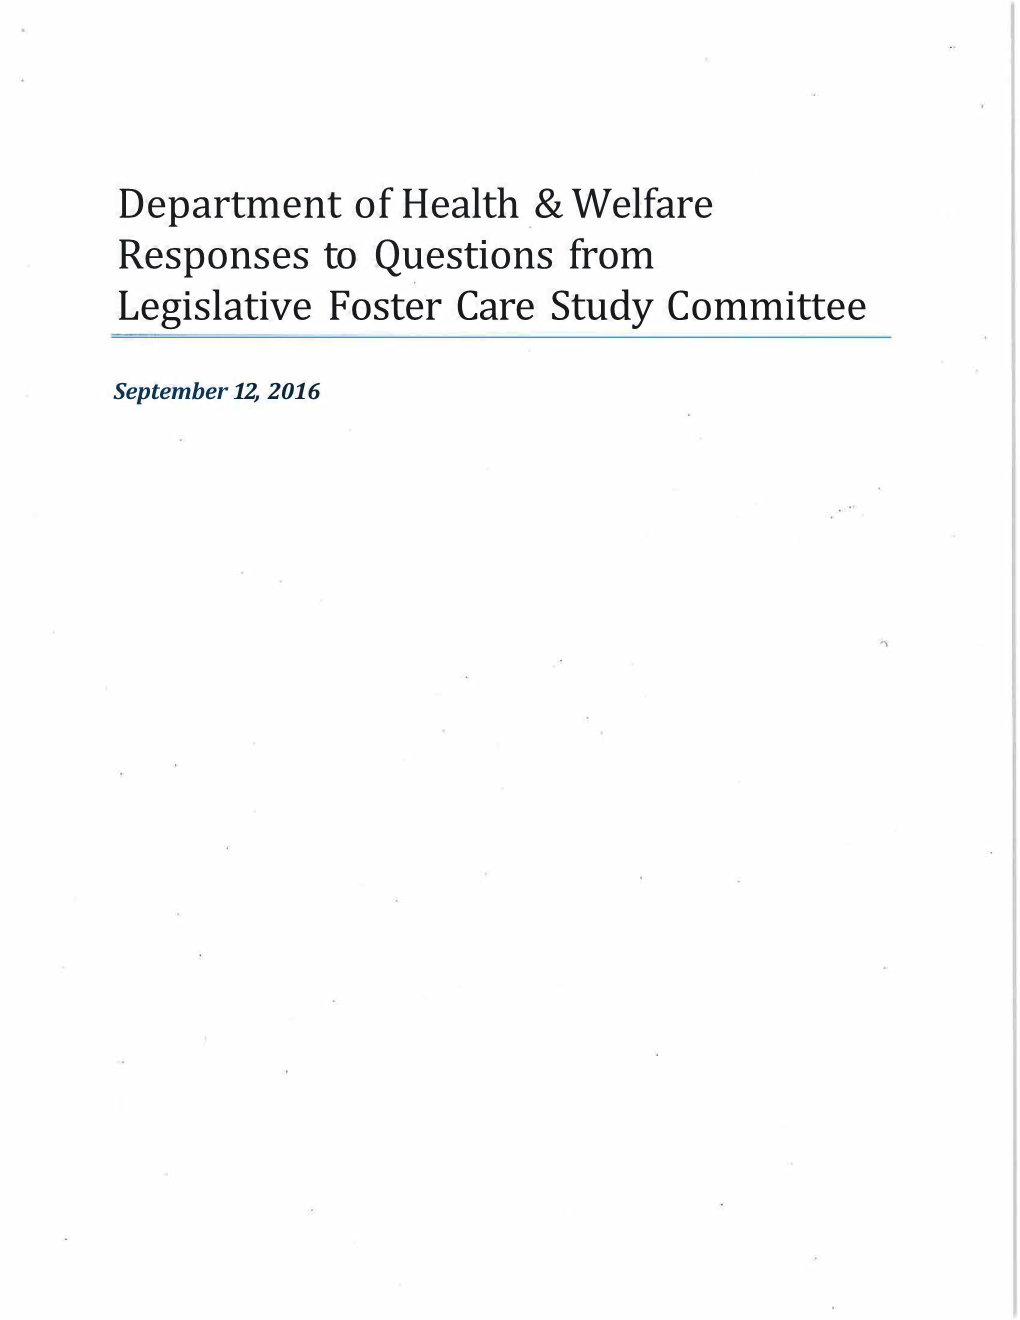 Department of Health & Welfare Responses to Questions From